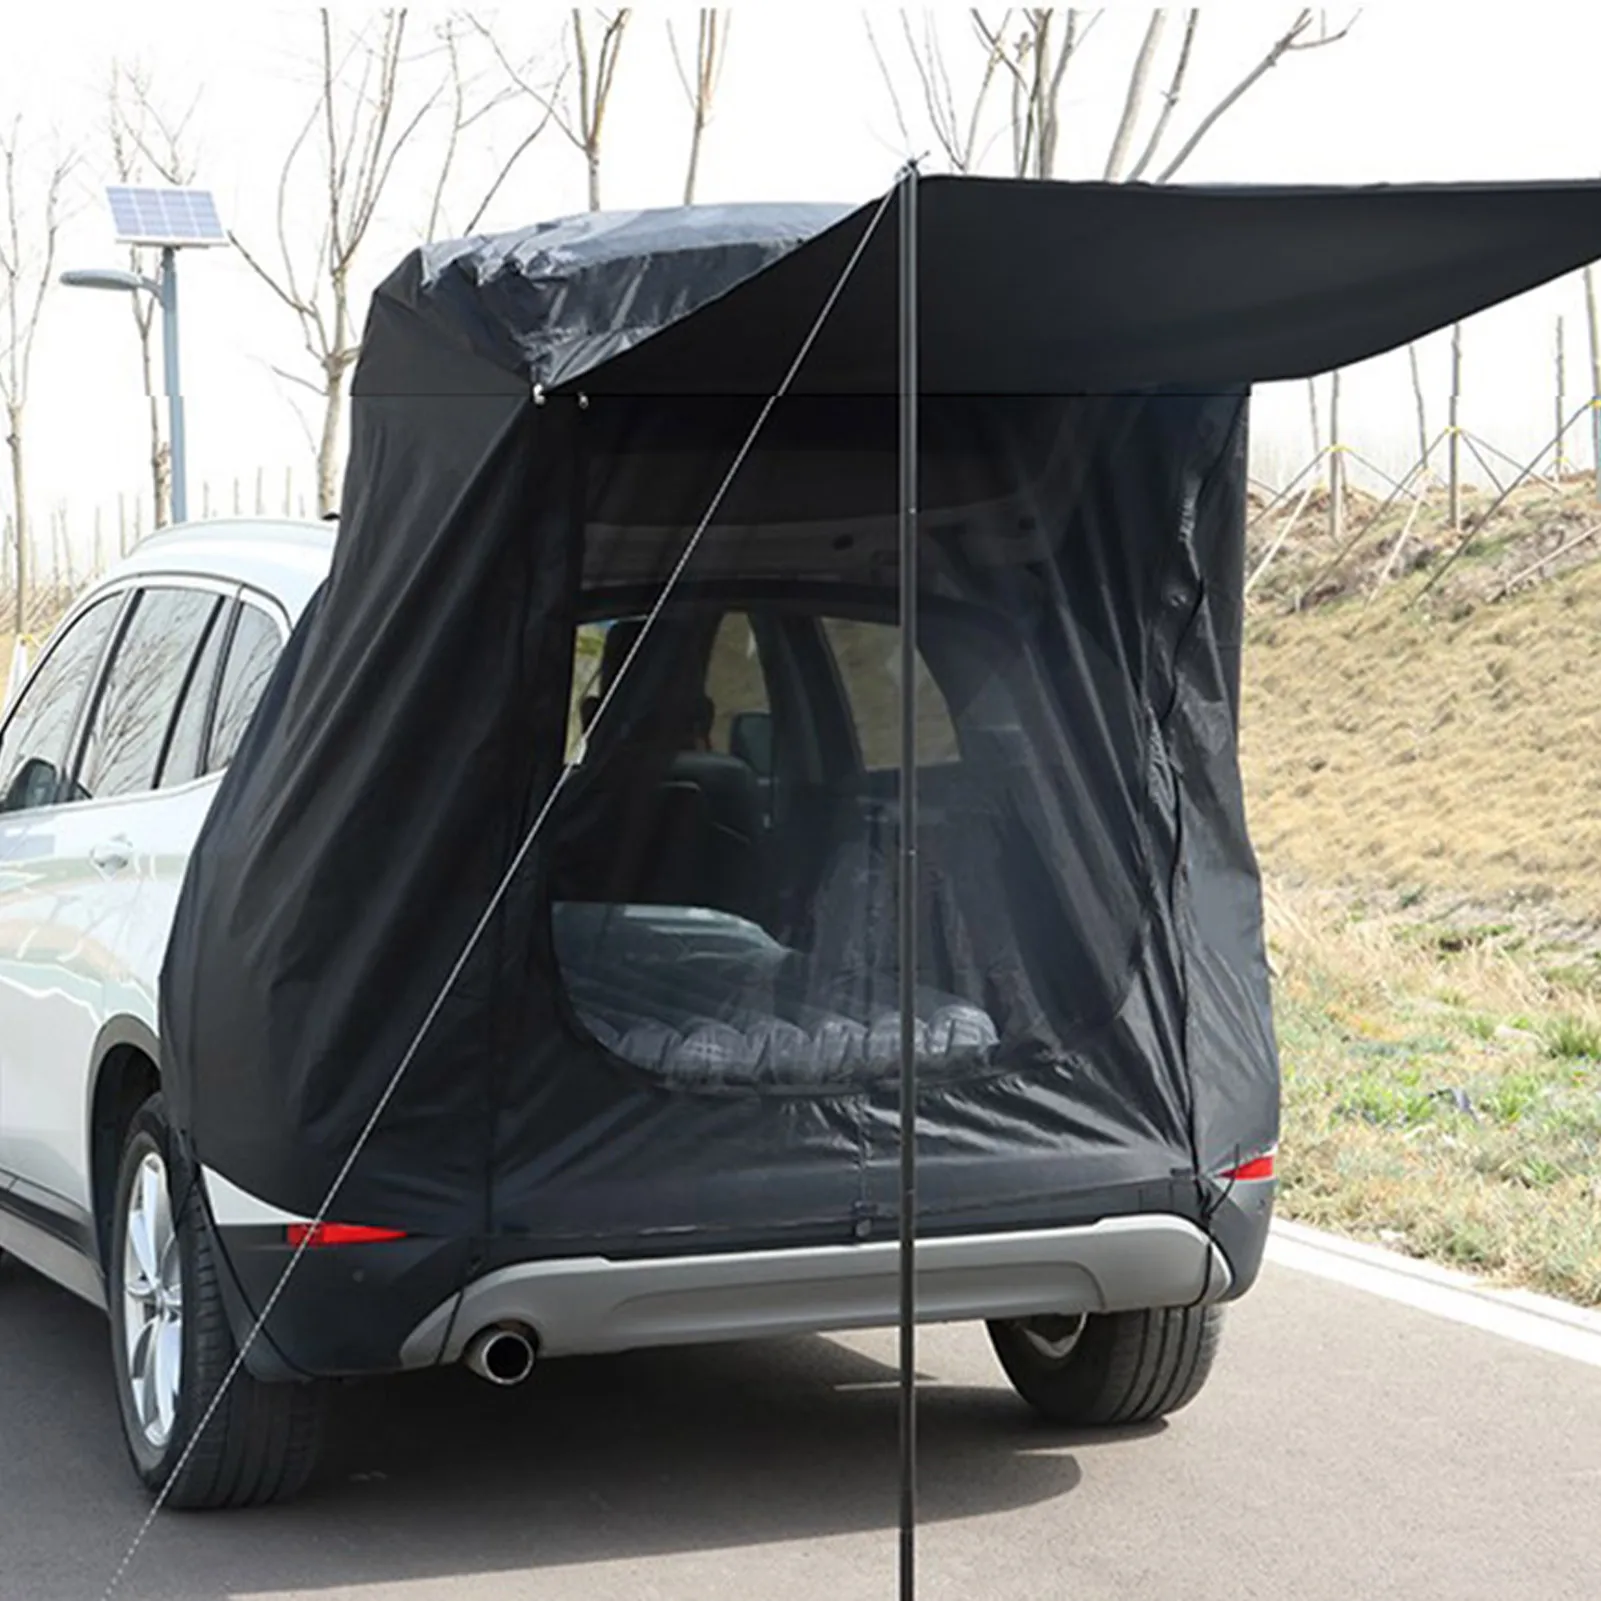 Portable Car Trunk Tent Sunshade Tent Awning Tailgate Canopy Trunk Tents Car Rear Extension Tent Outdoor Camping Tent For SUVs